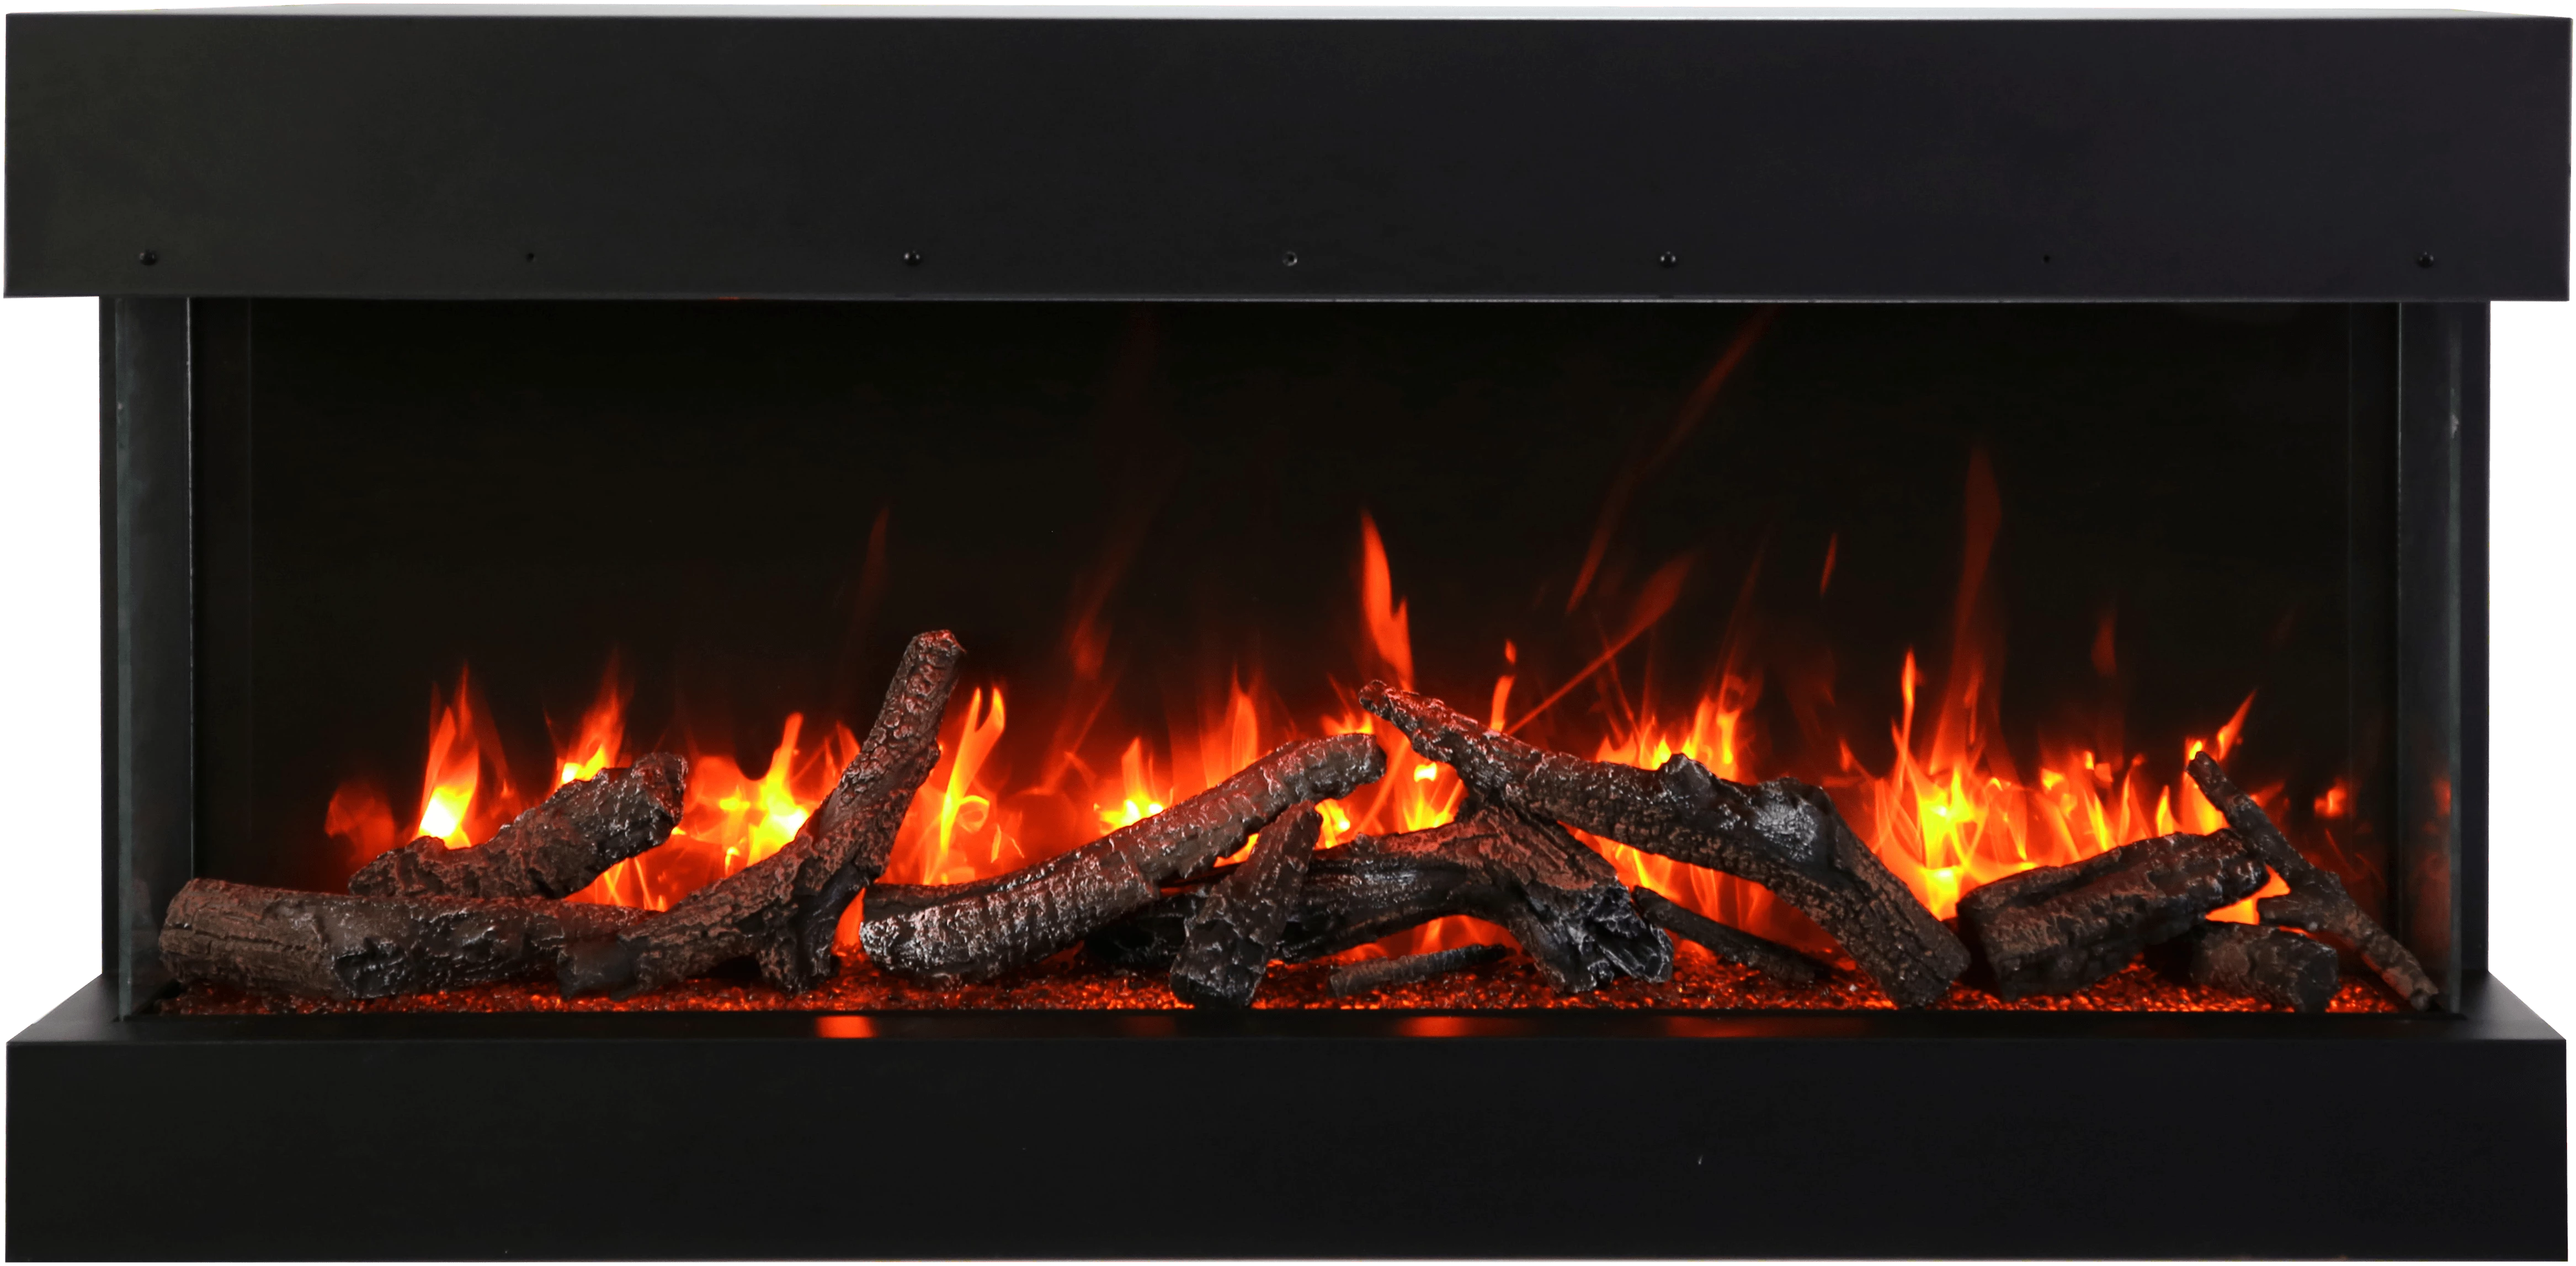 Amantii TRV-View Deep XT Series 3-Sided Glass Electric Fireplace